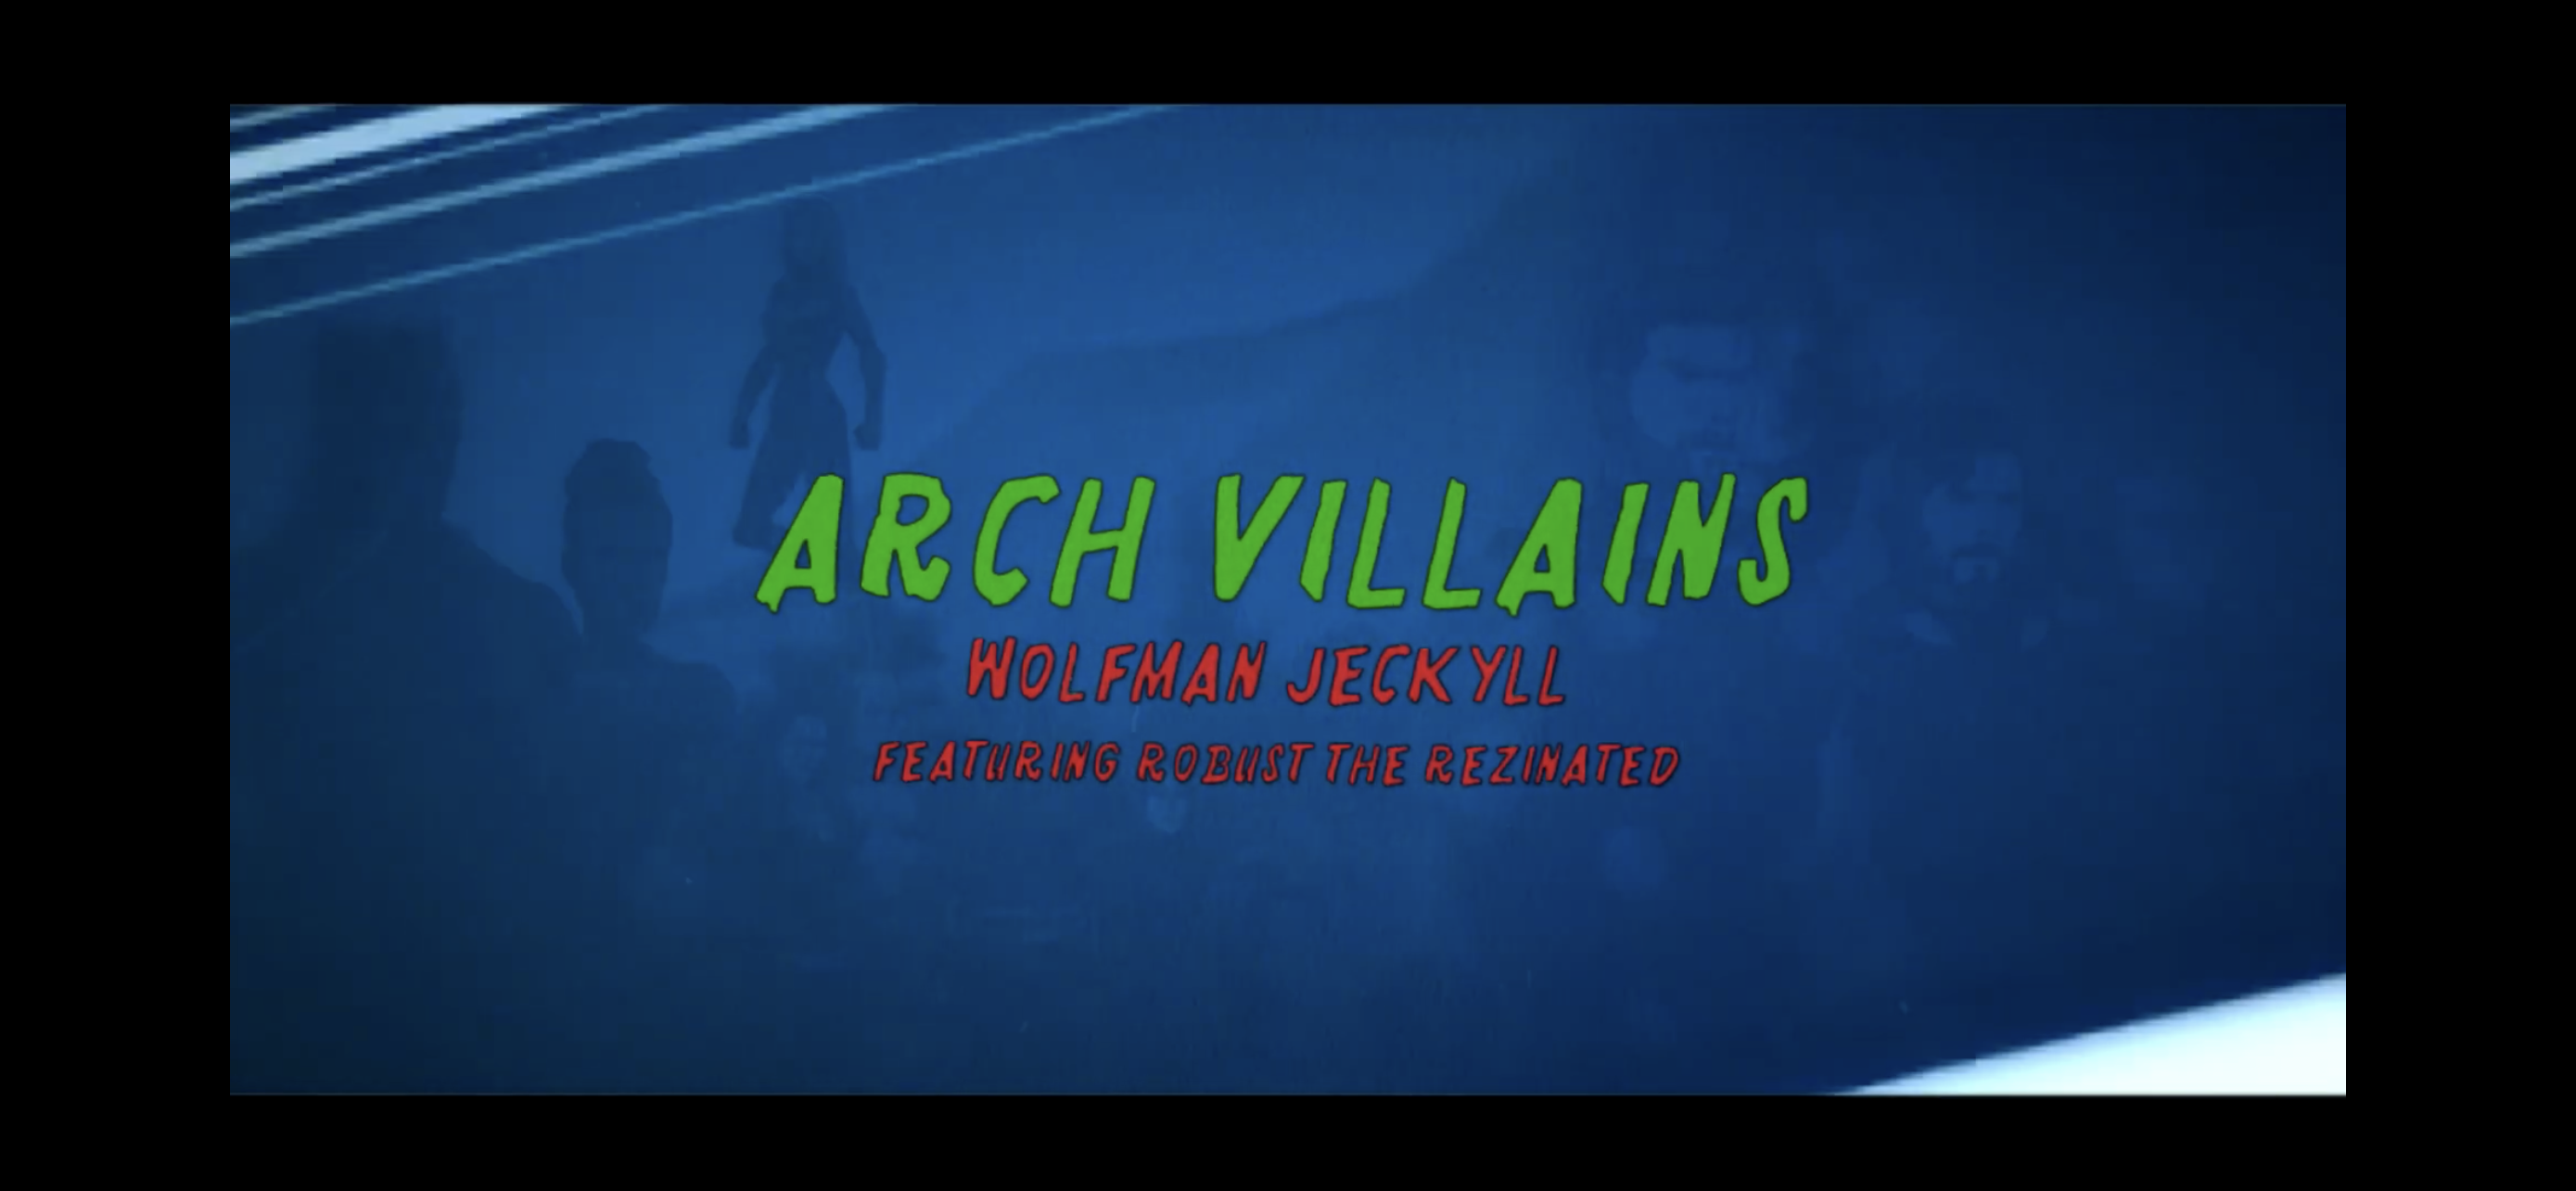 Wolfman Jeckyll - Arch Villains feat. Robust The Rezinated (prod. by The Nerds)